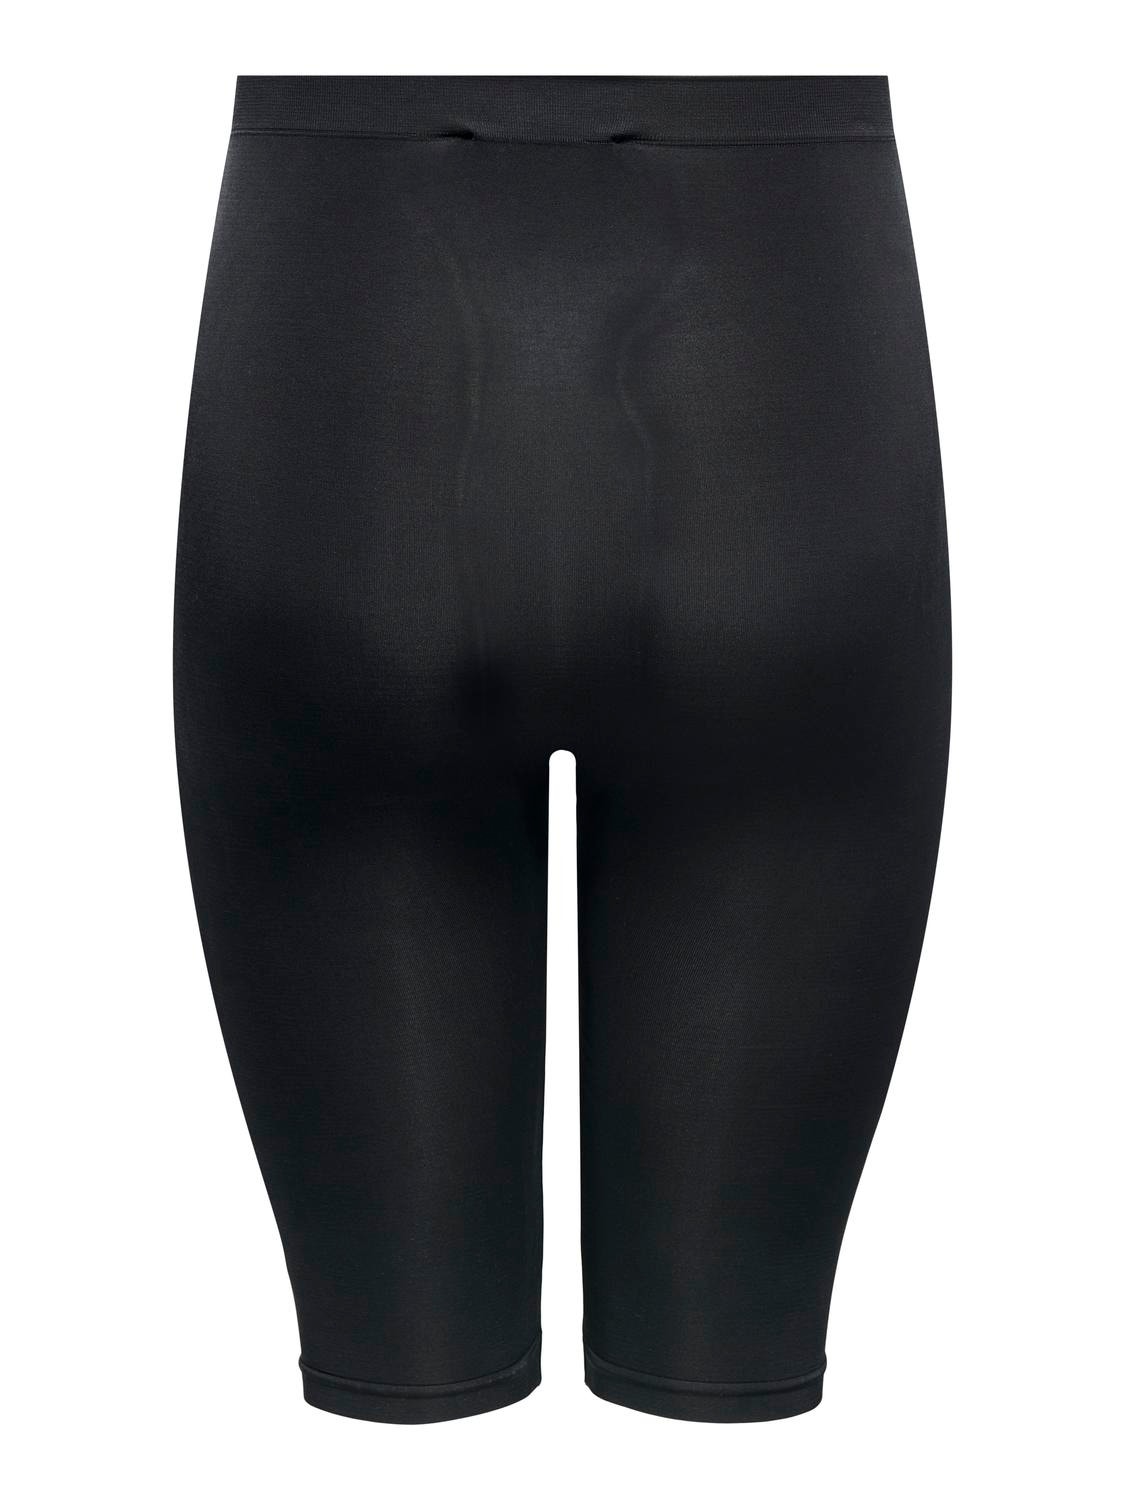 ONLY Shorts Corte tight -Black - 15294672